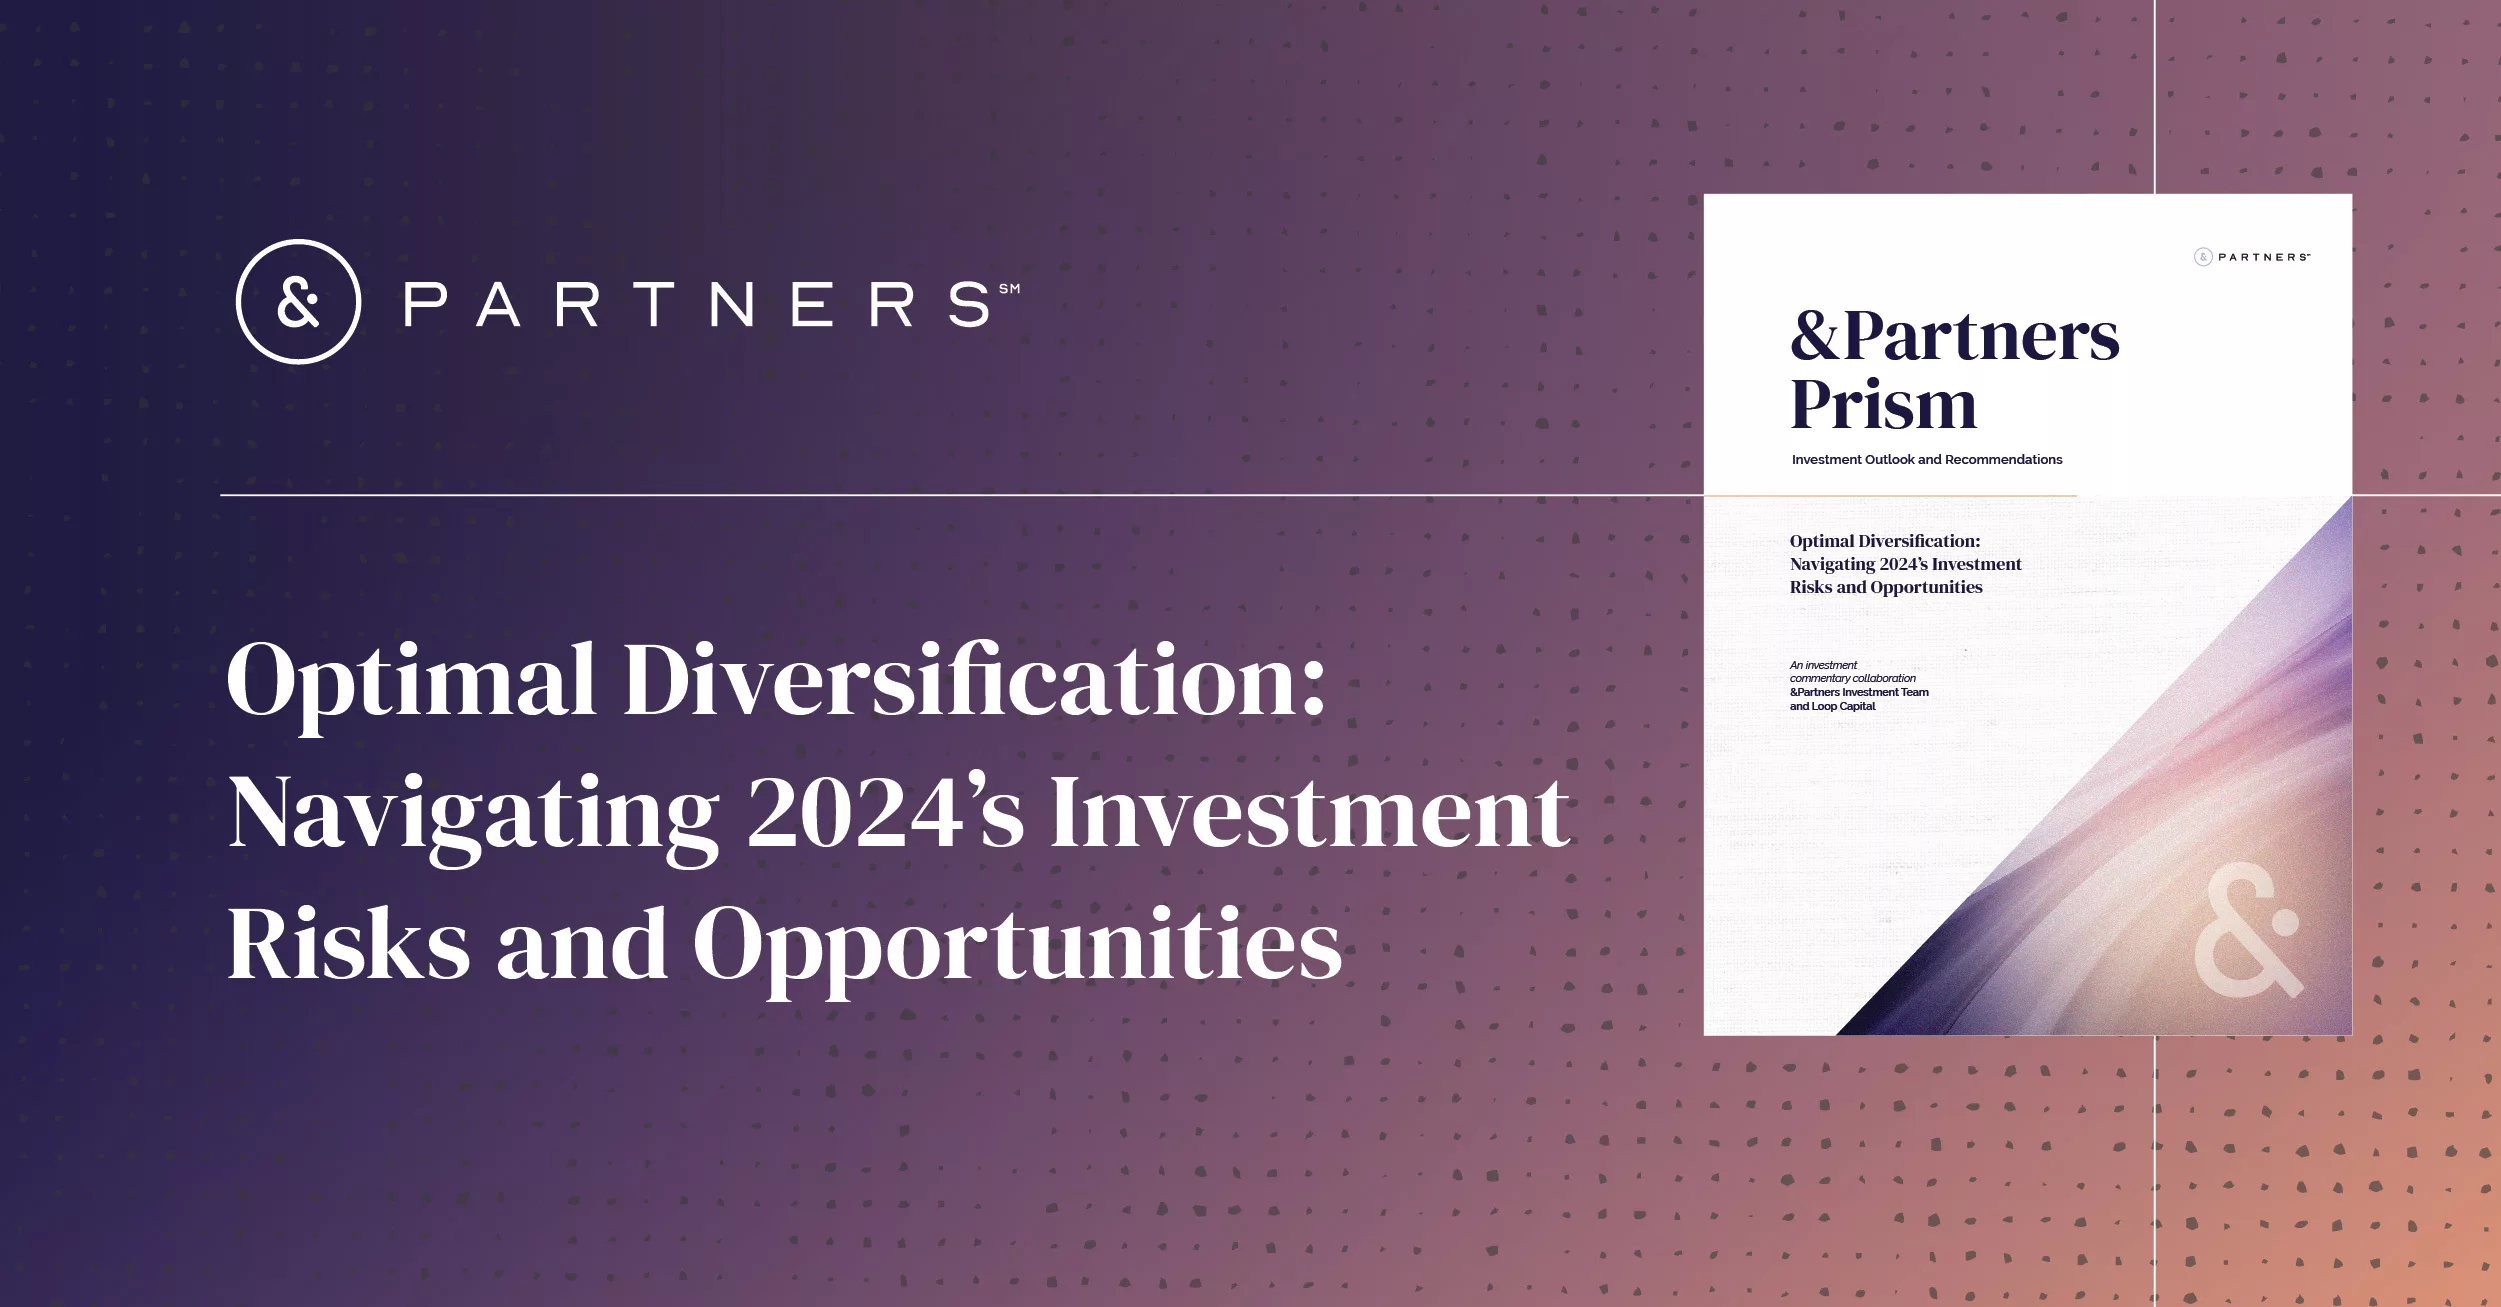 Optimal Diversification: Navigating 2024’s Investment Risks and Opportunities